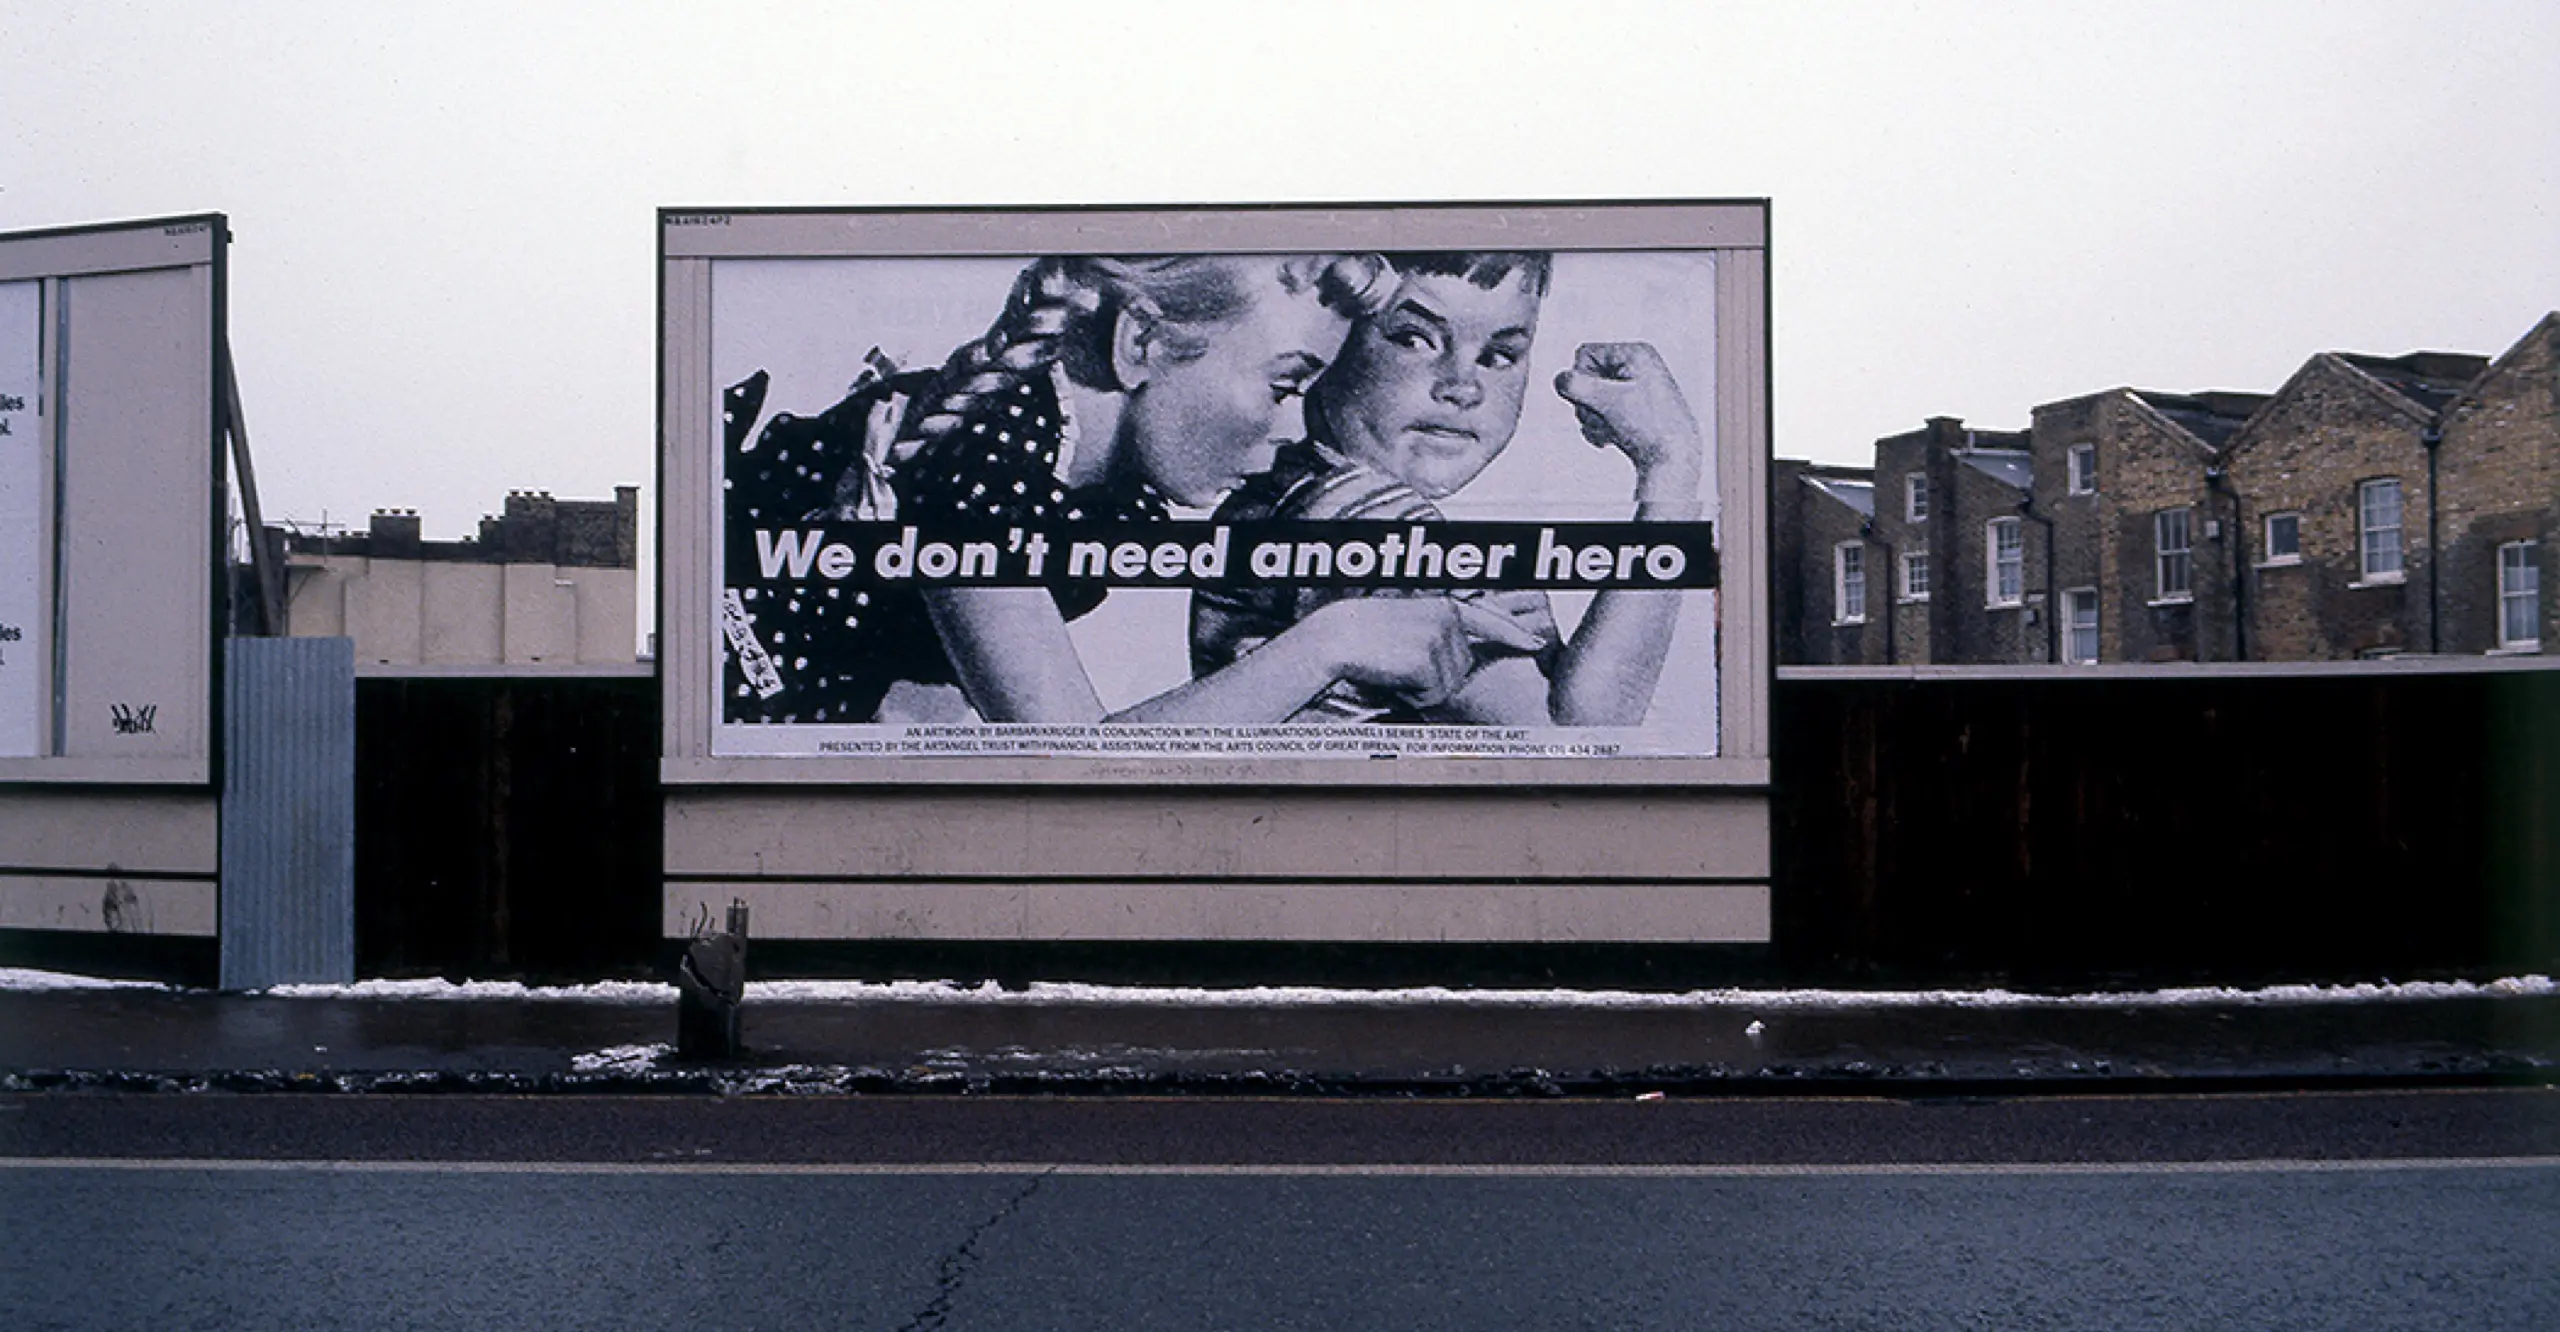 Black and white photograph of a billboard featuring a vintage-style advert of two children and the words "we don't need another hero" printed across